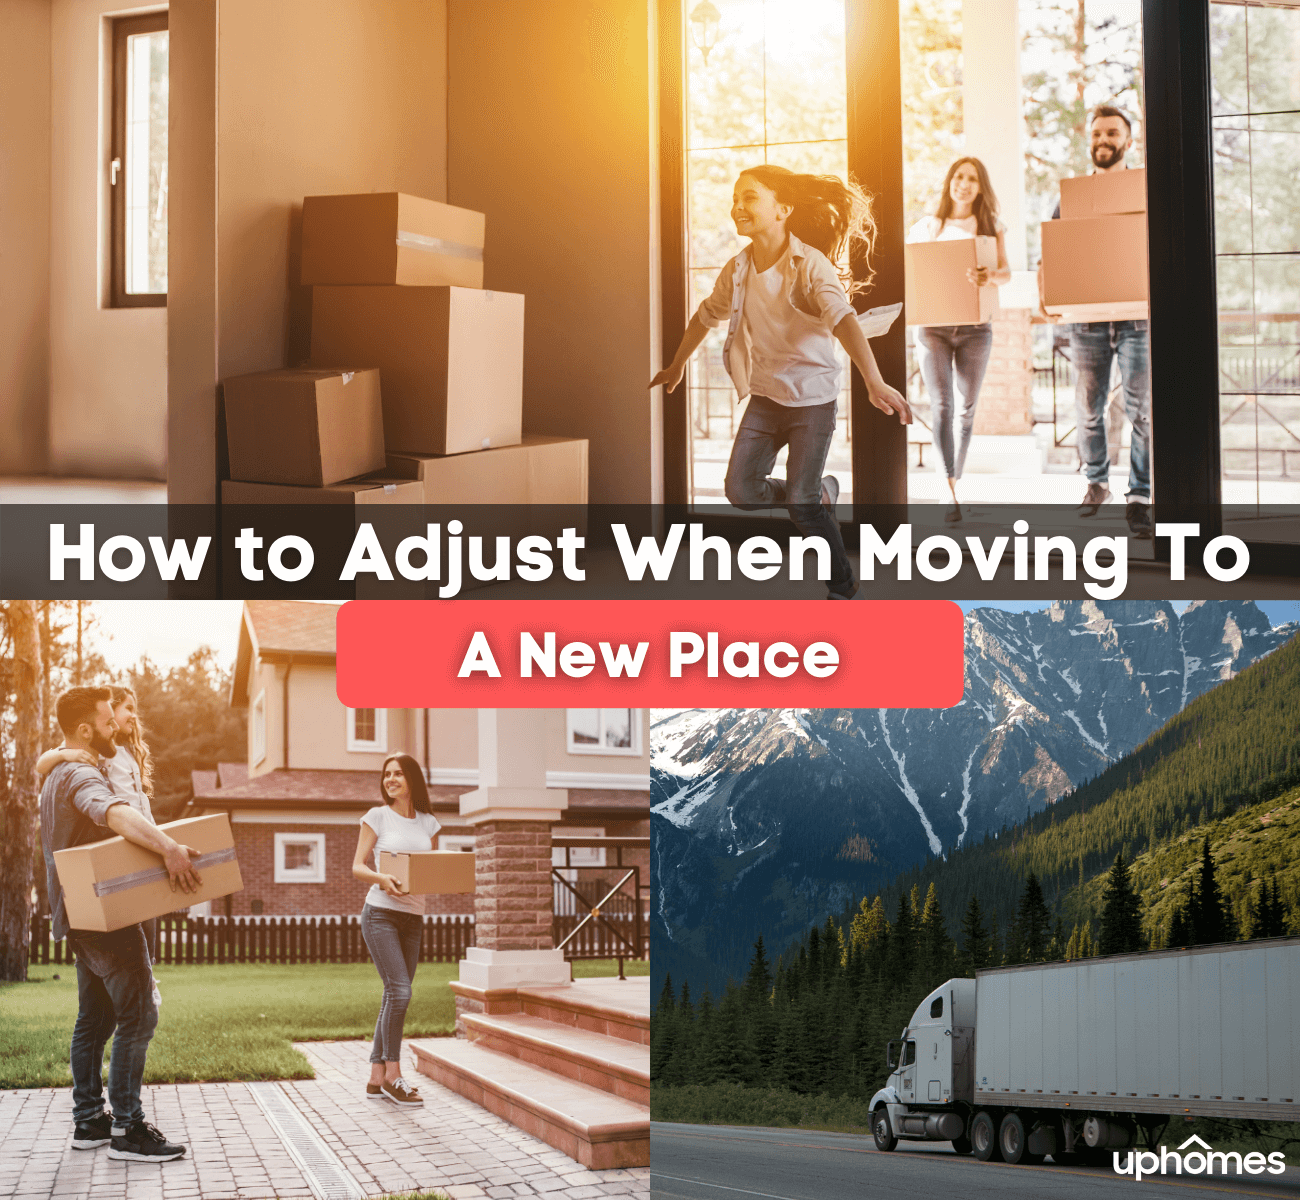 How to Adjust When Moving to a New Place